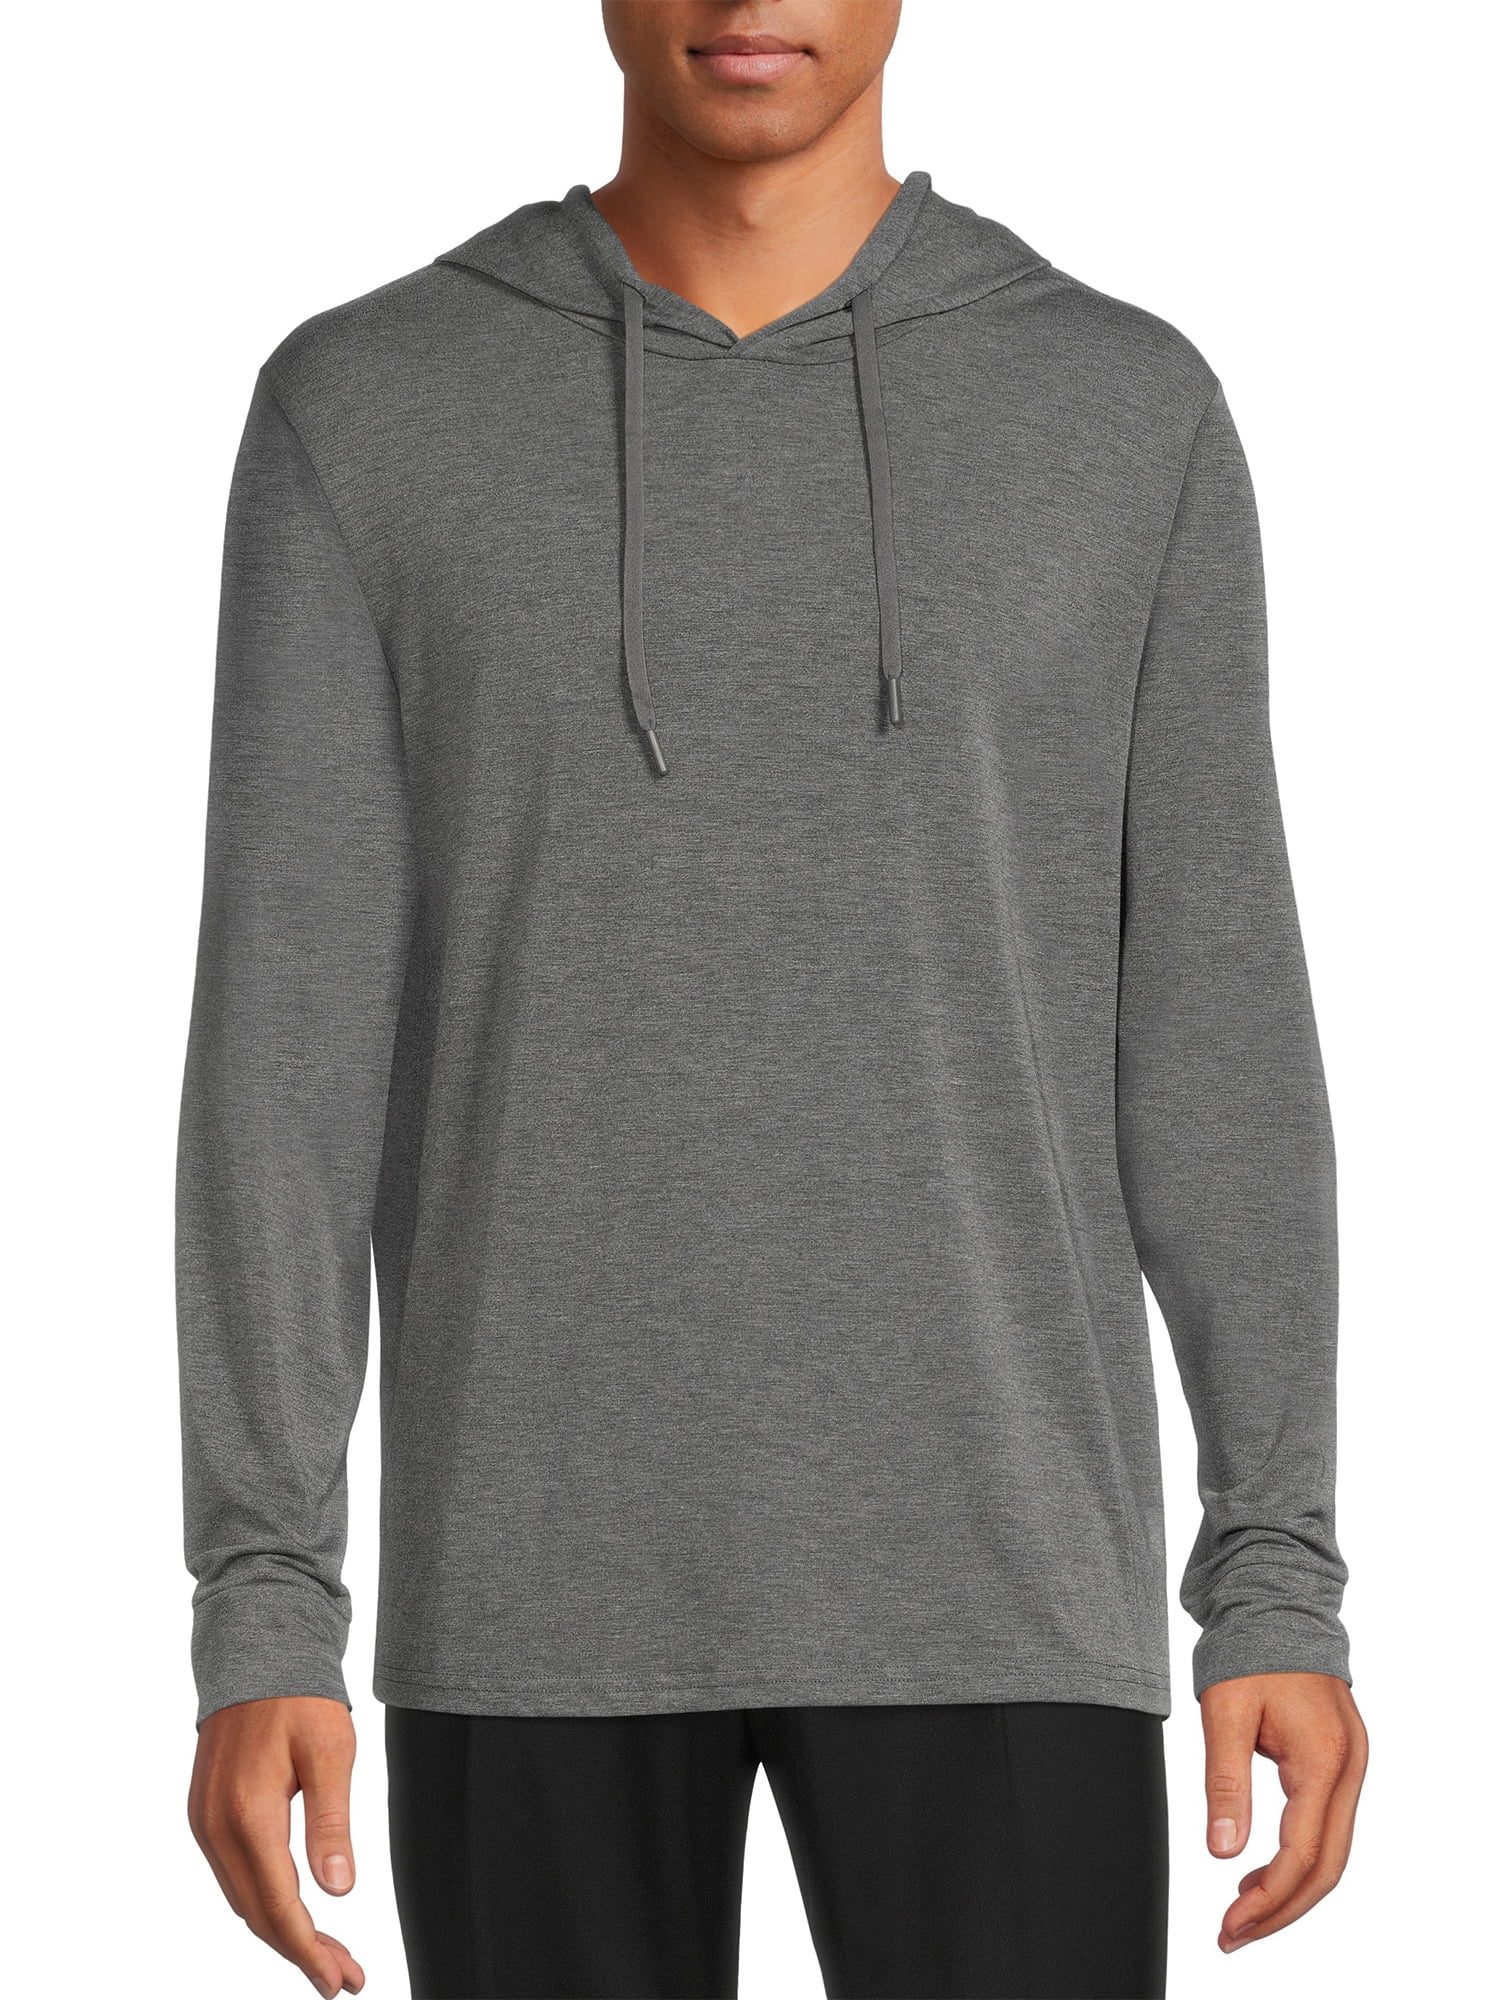 George Men's Relaxed Soft Knit Lounge Hoodie - Walmart.com